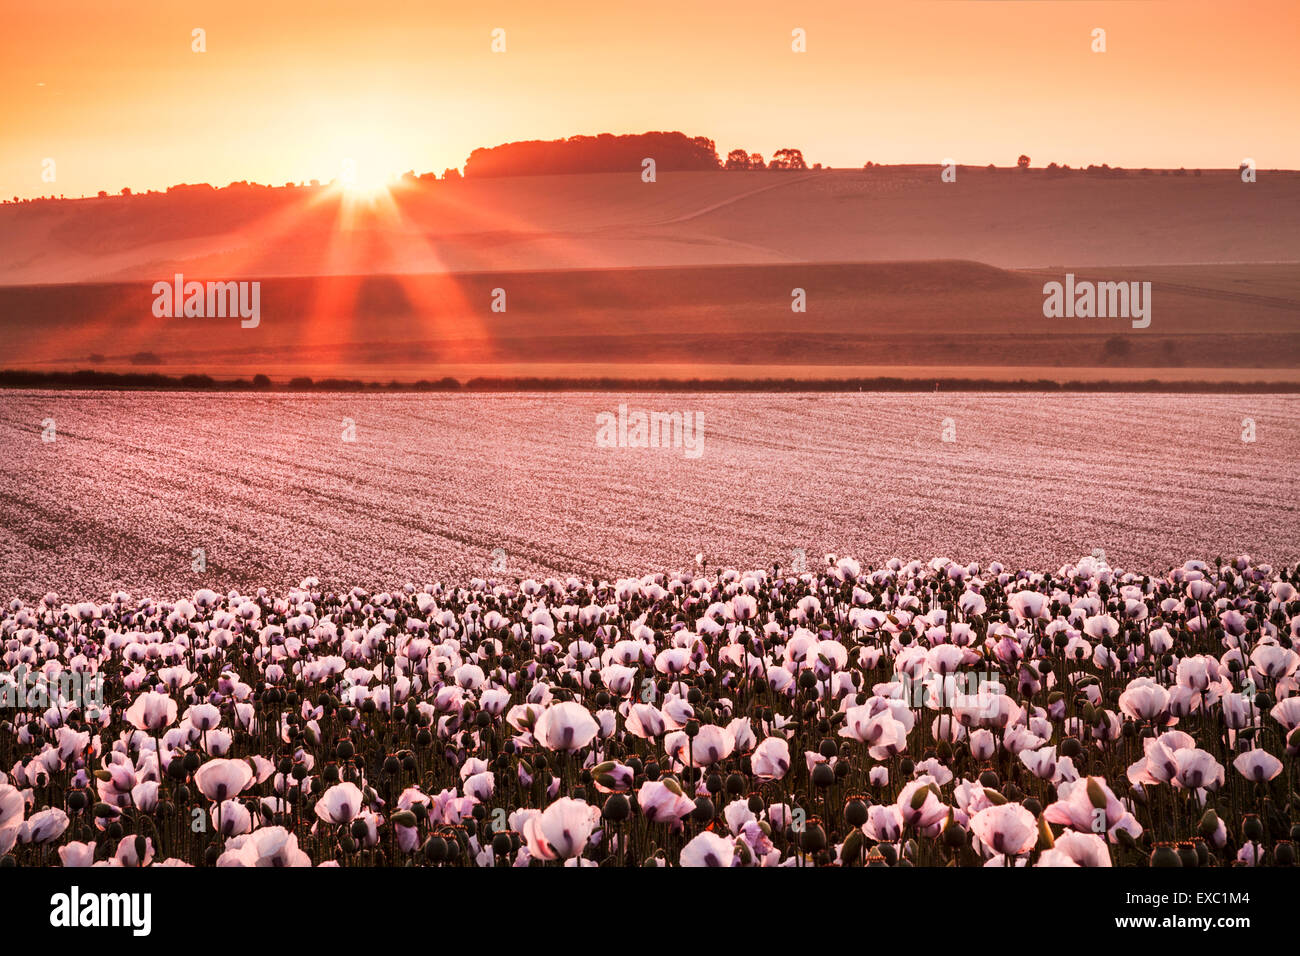 Field of cultivated white poppies near Rockley in Wiltshire. Stock Photo